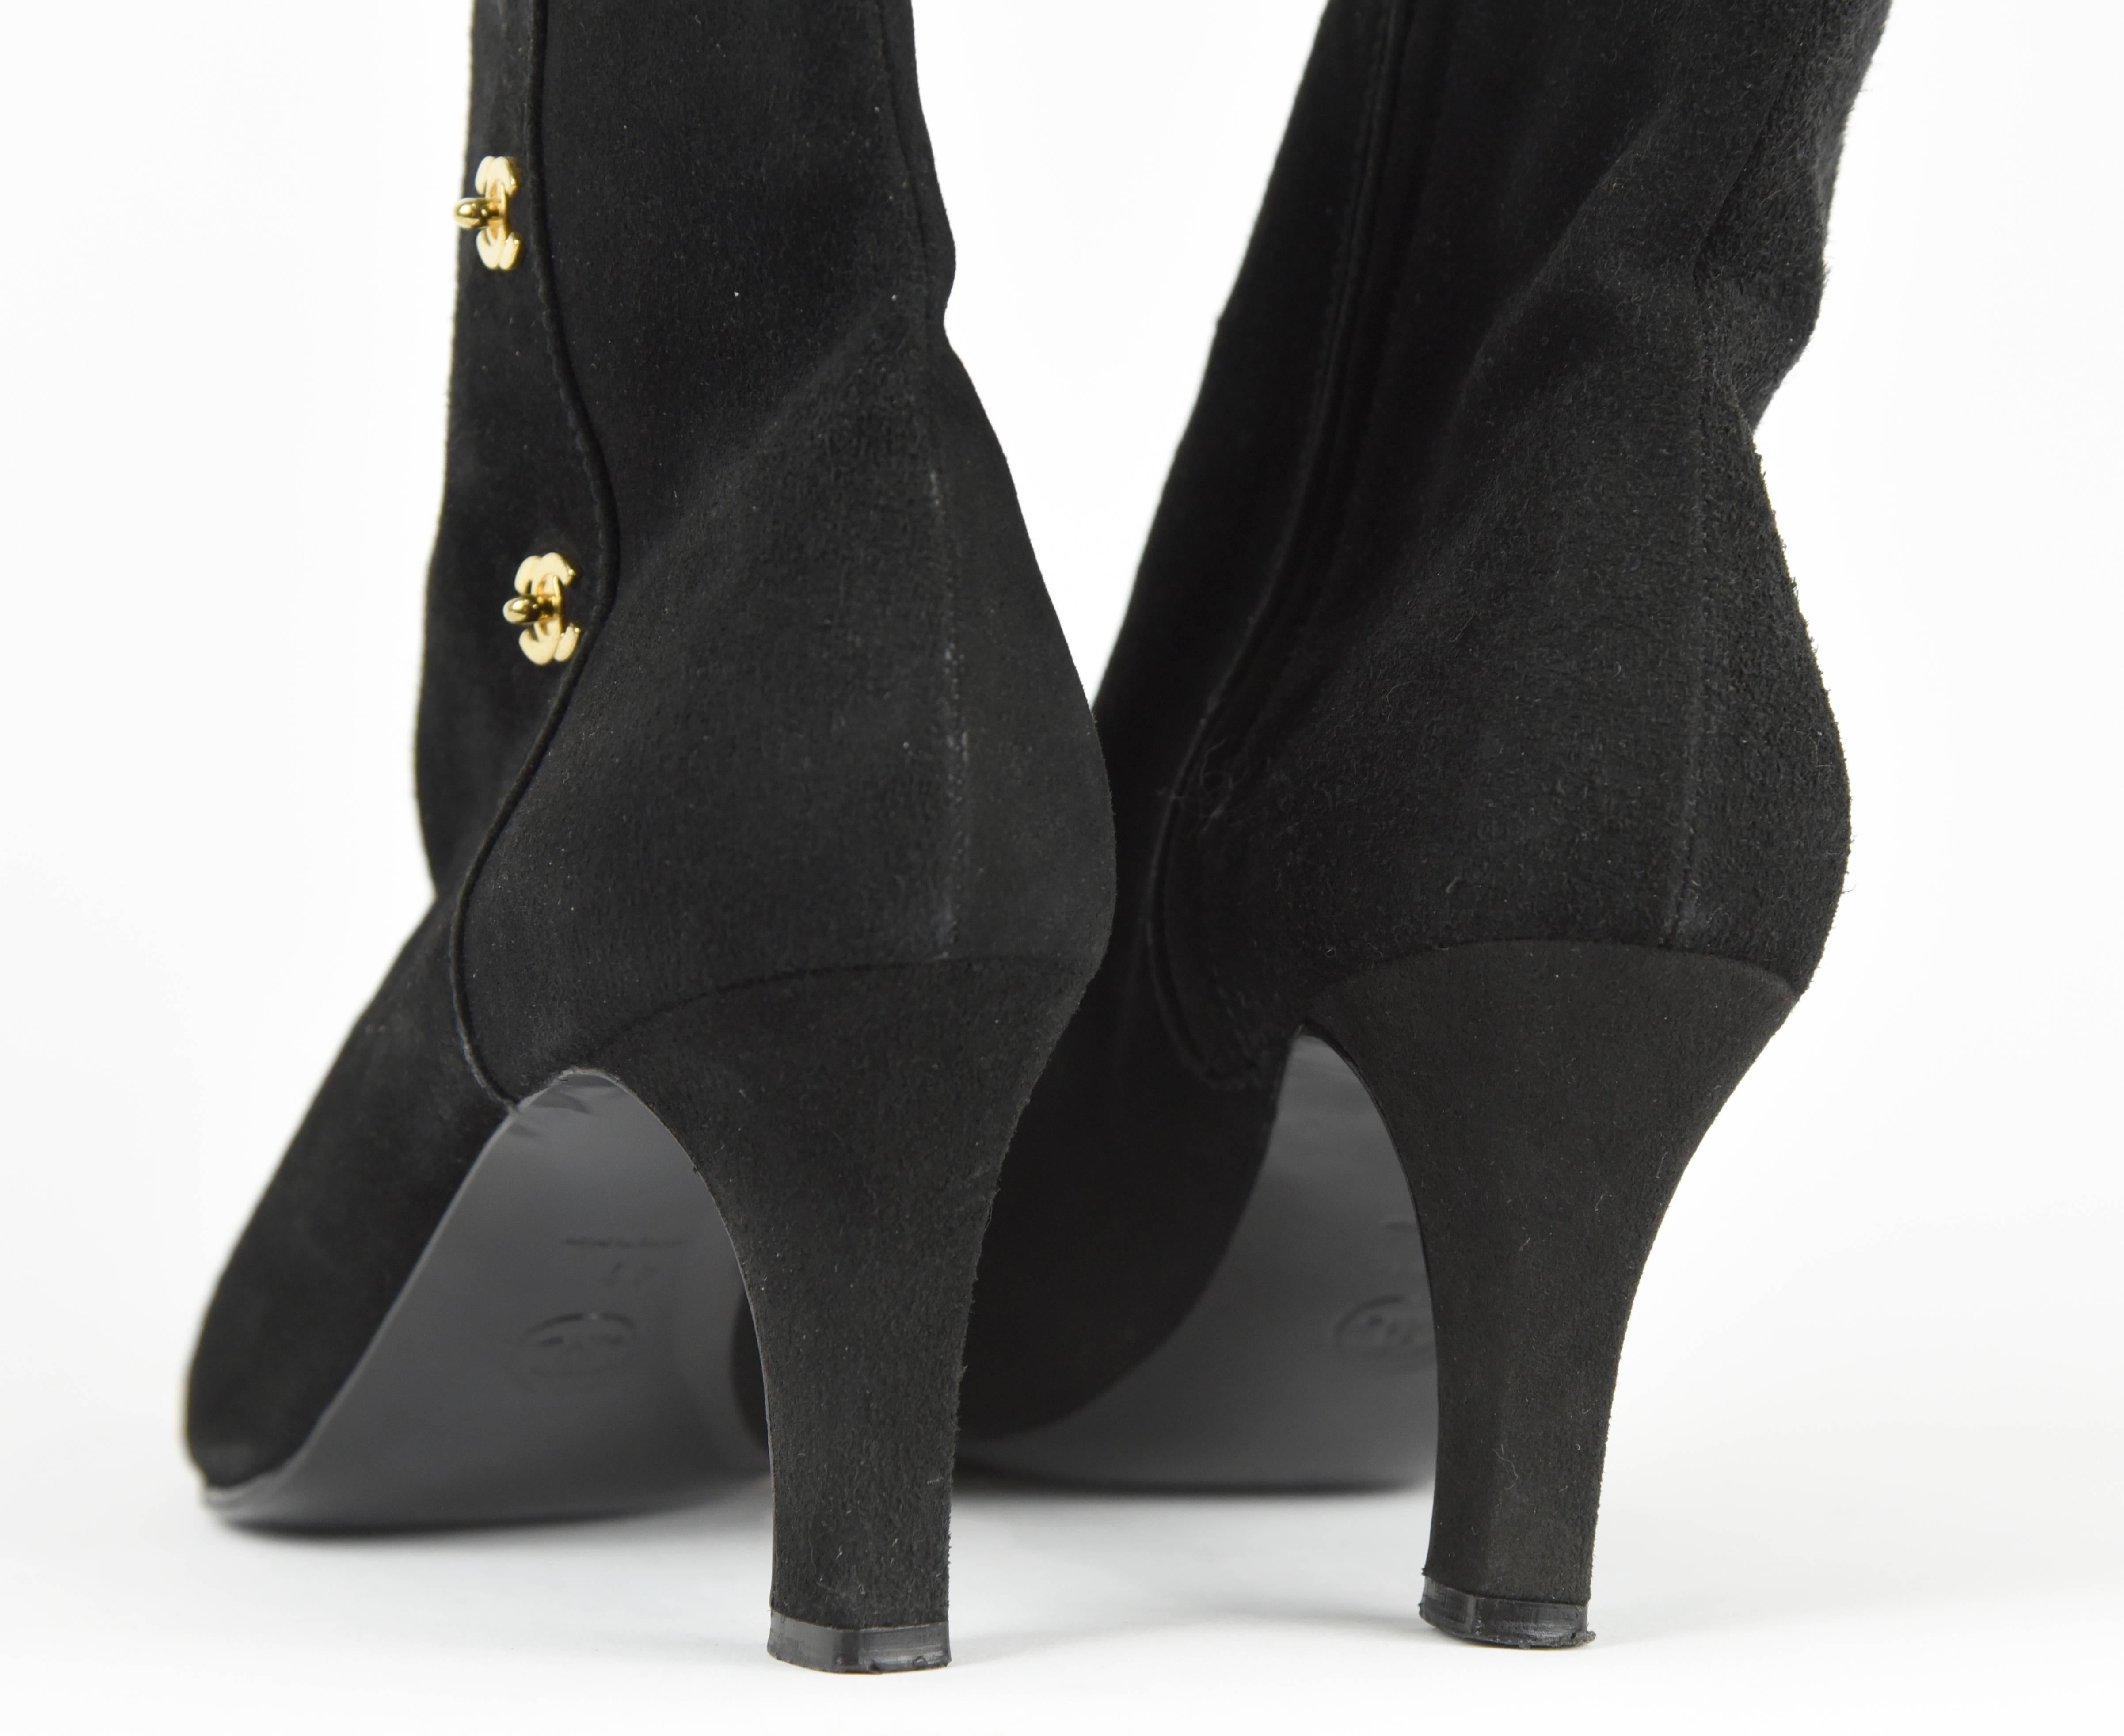 Chanel 1990s Black Suede Ankle Boots with 3 Gold 